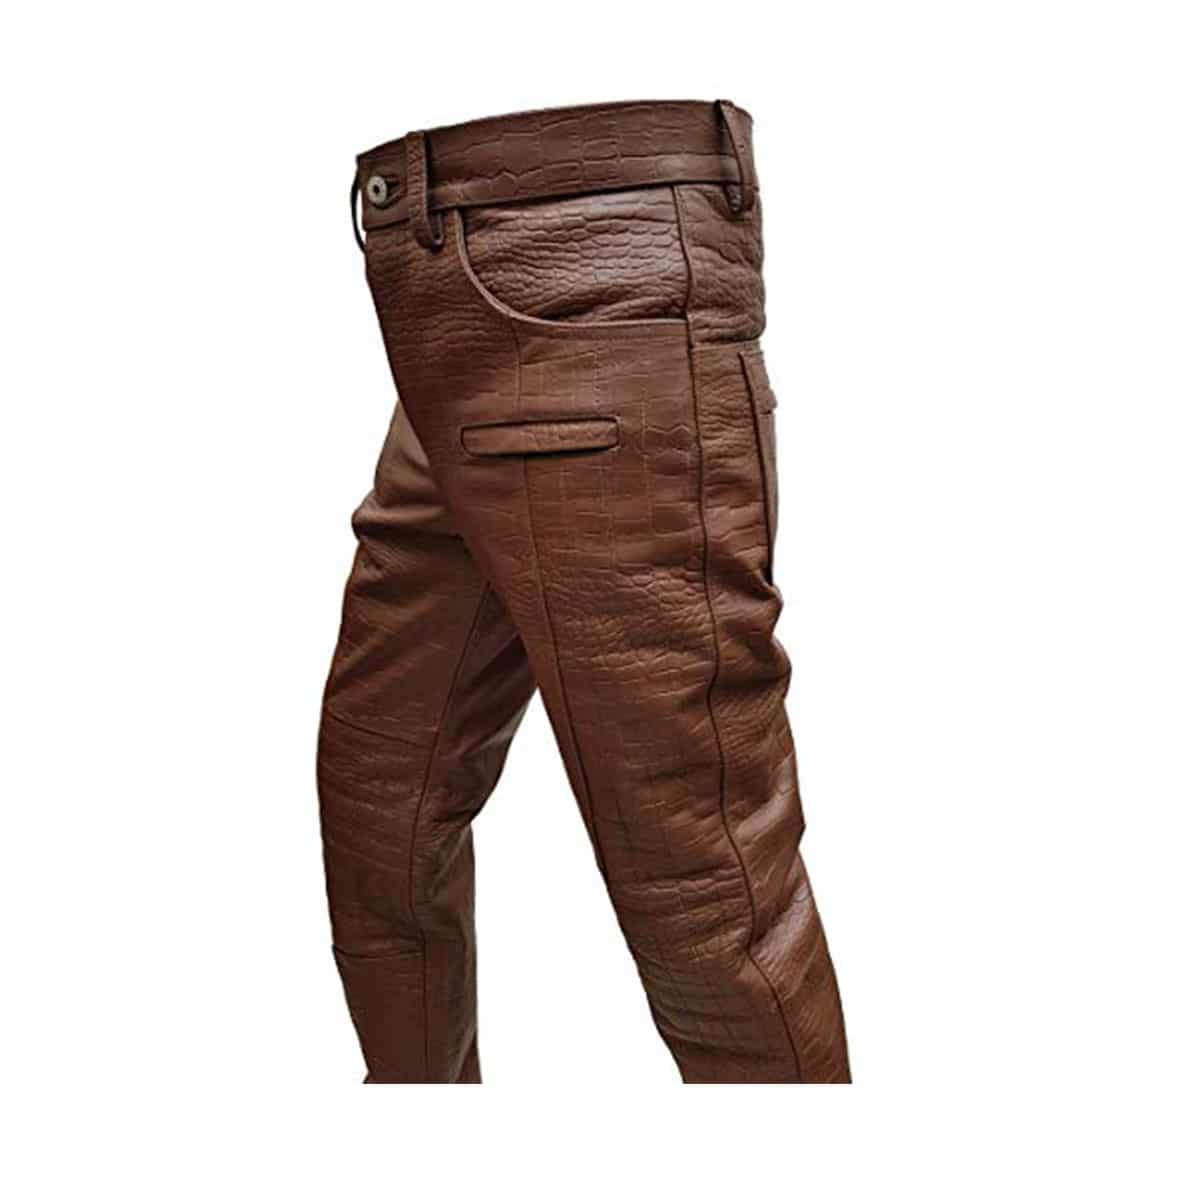 Mens Brown Crocodile Print Leather Quilted 502 Style Motorcycle Bikers Pants Jeans Trouser-502